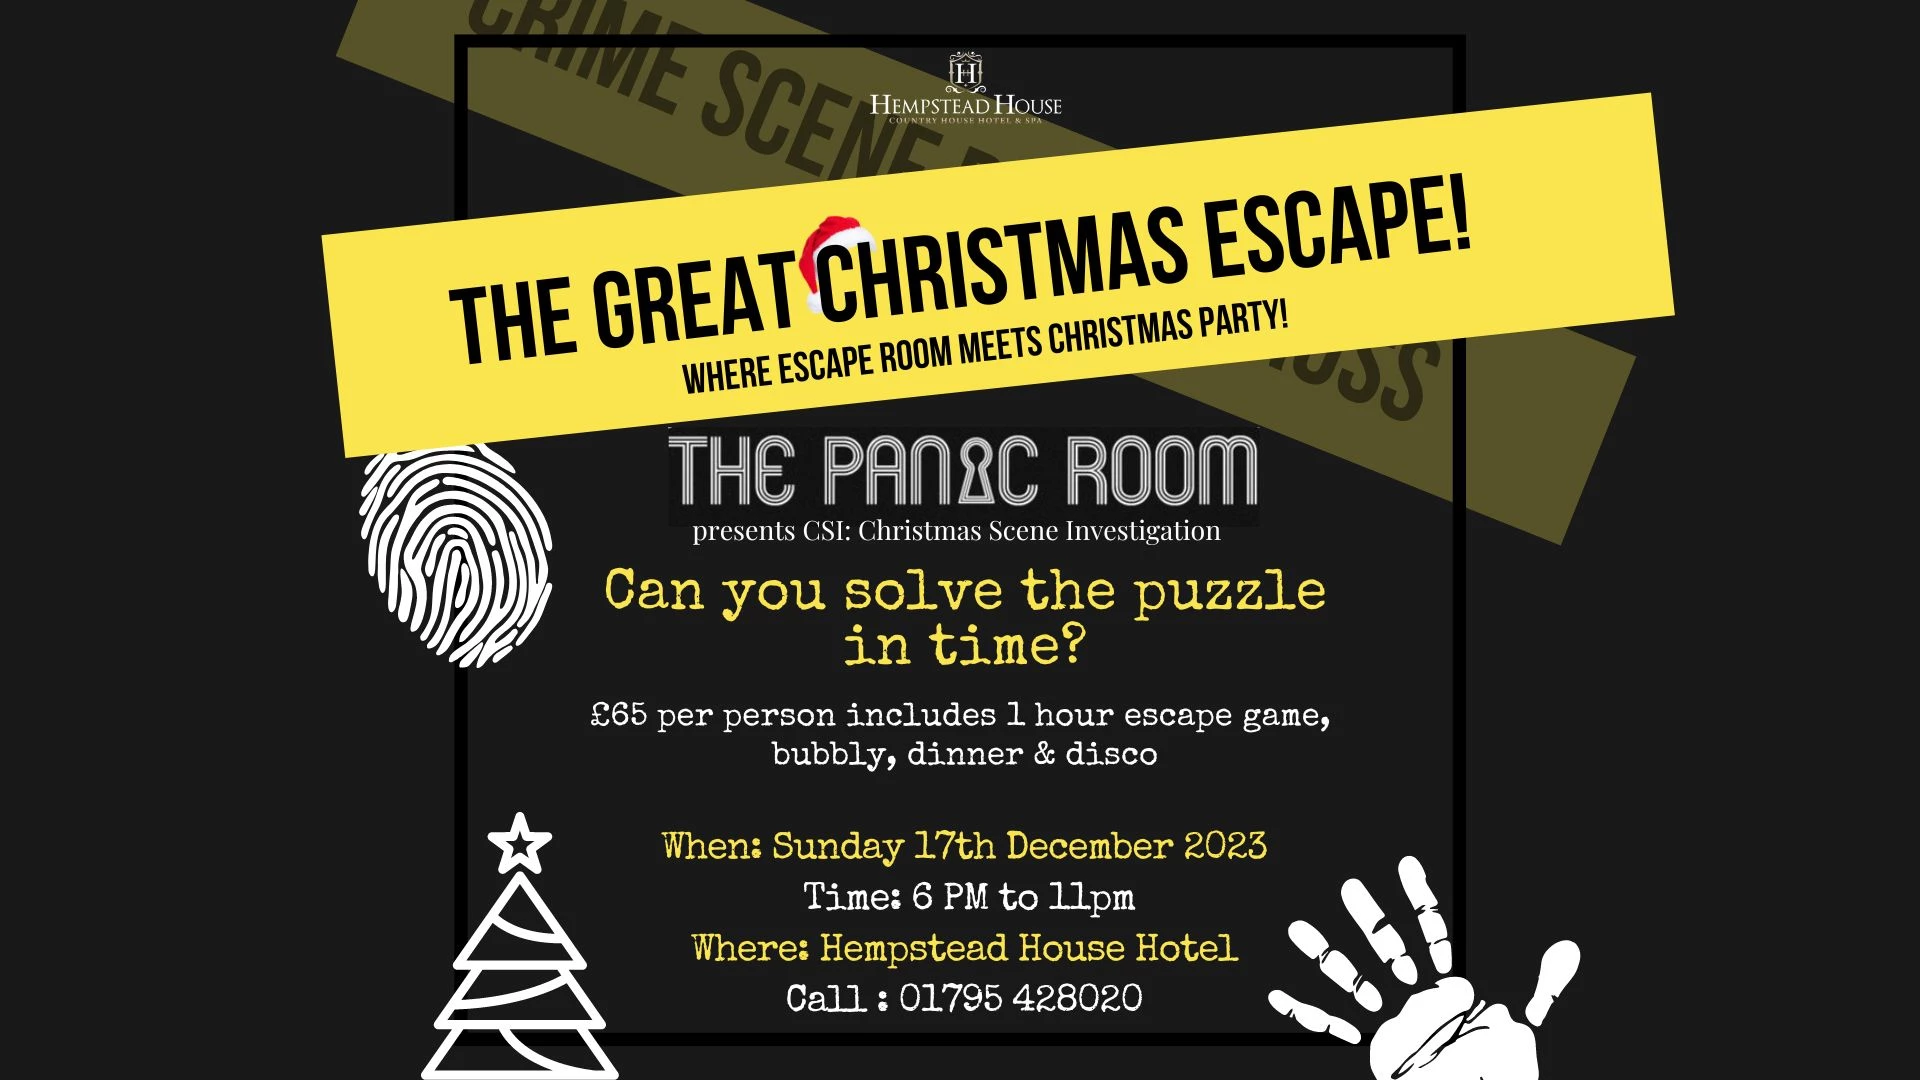 The Great Christmas Escape!